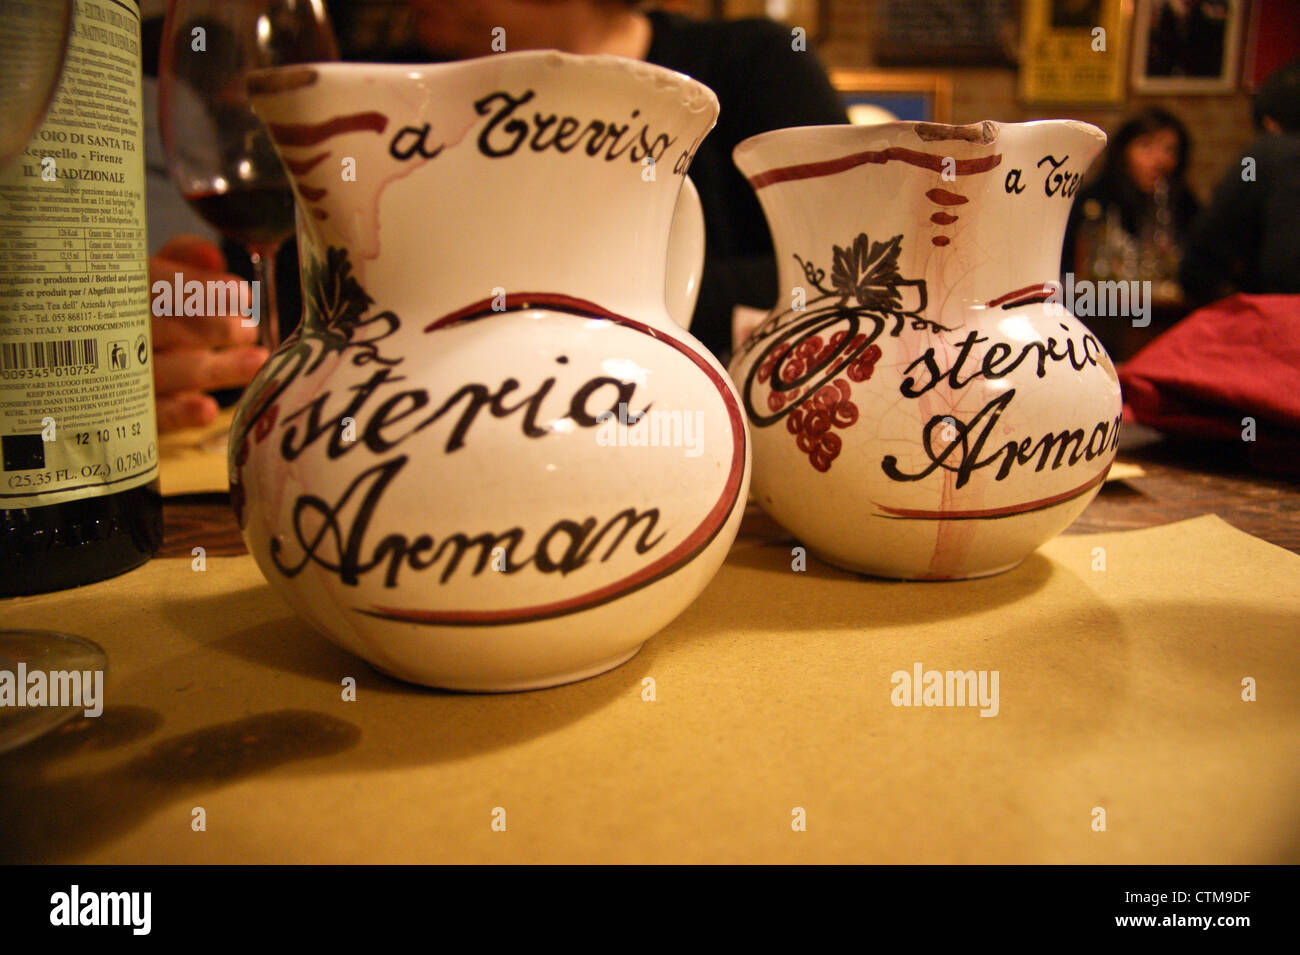 Osteria Arman restaurant  Treviso, italy - carafes of wine on the table Stock Photo